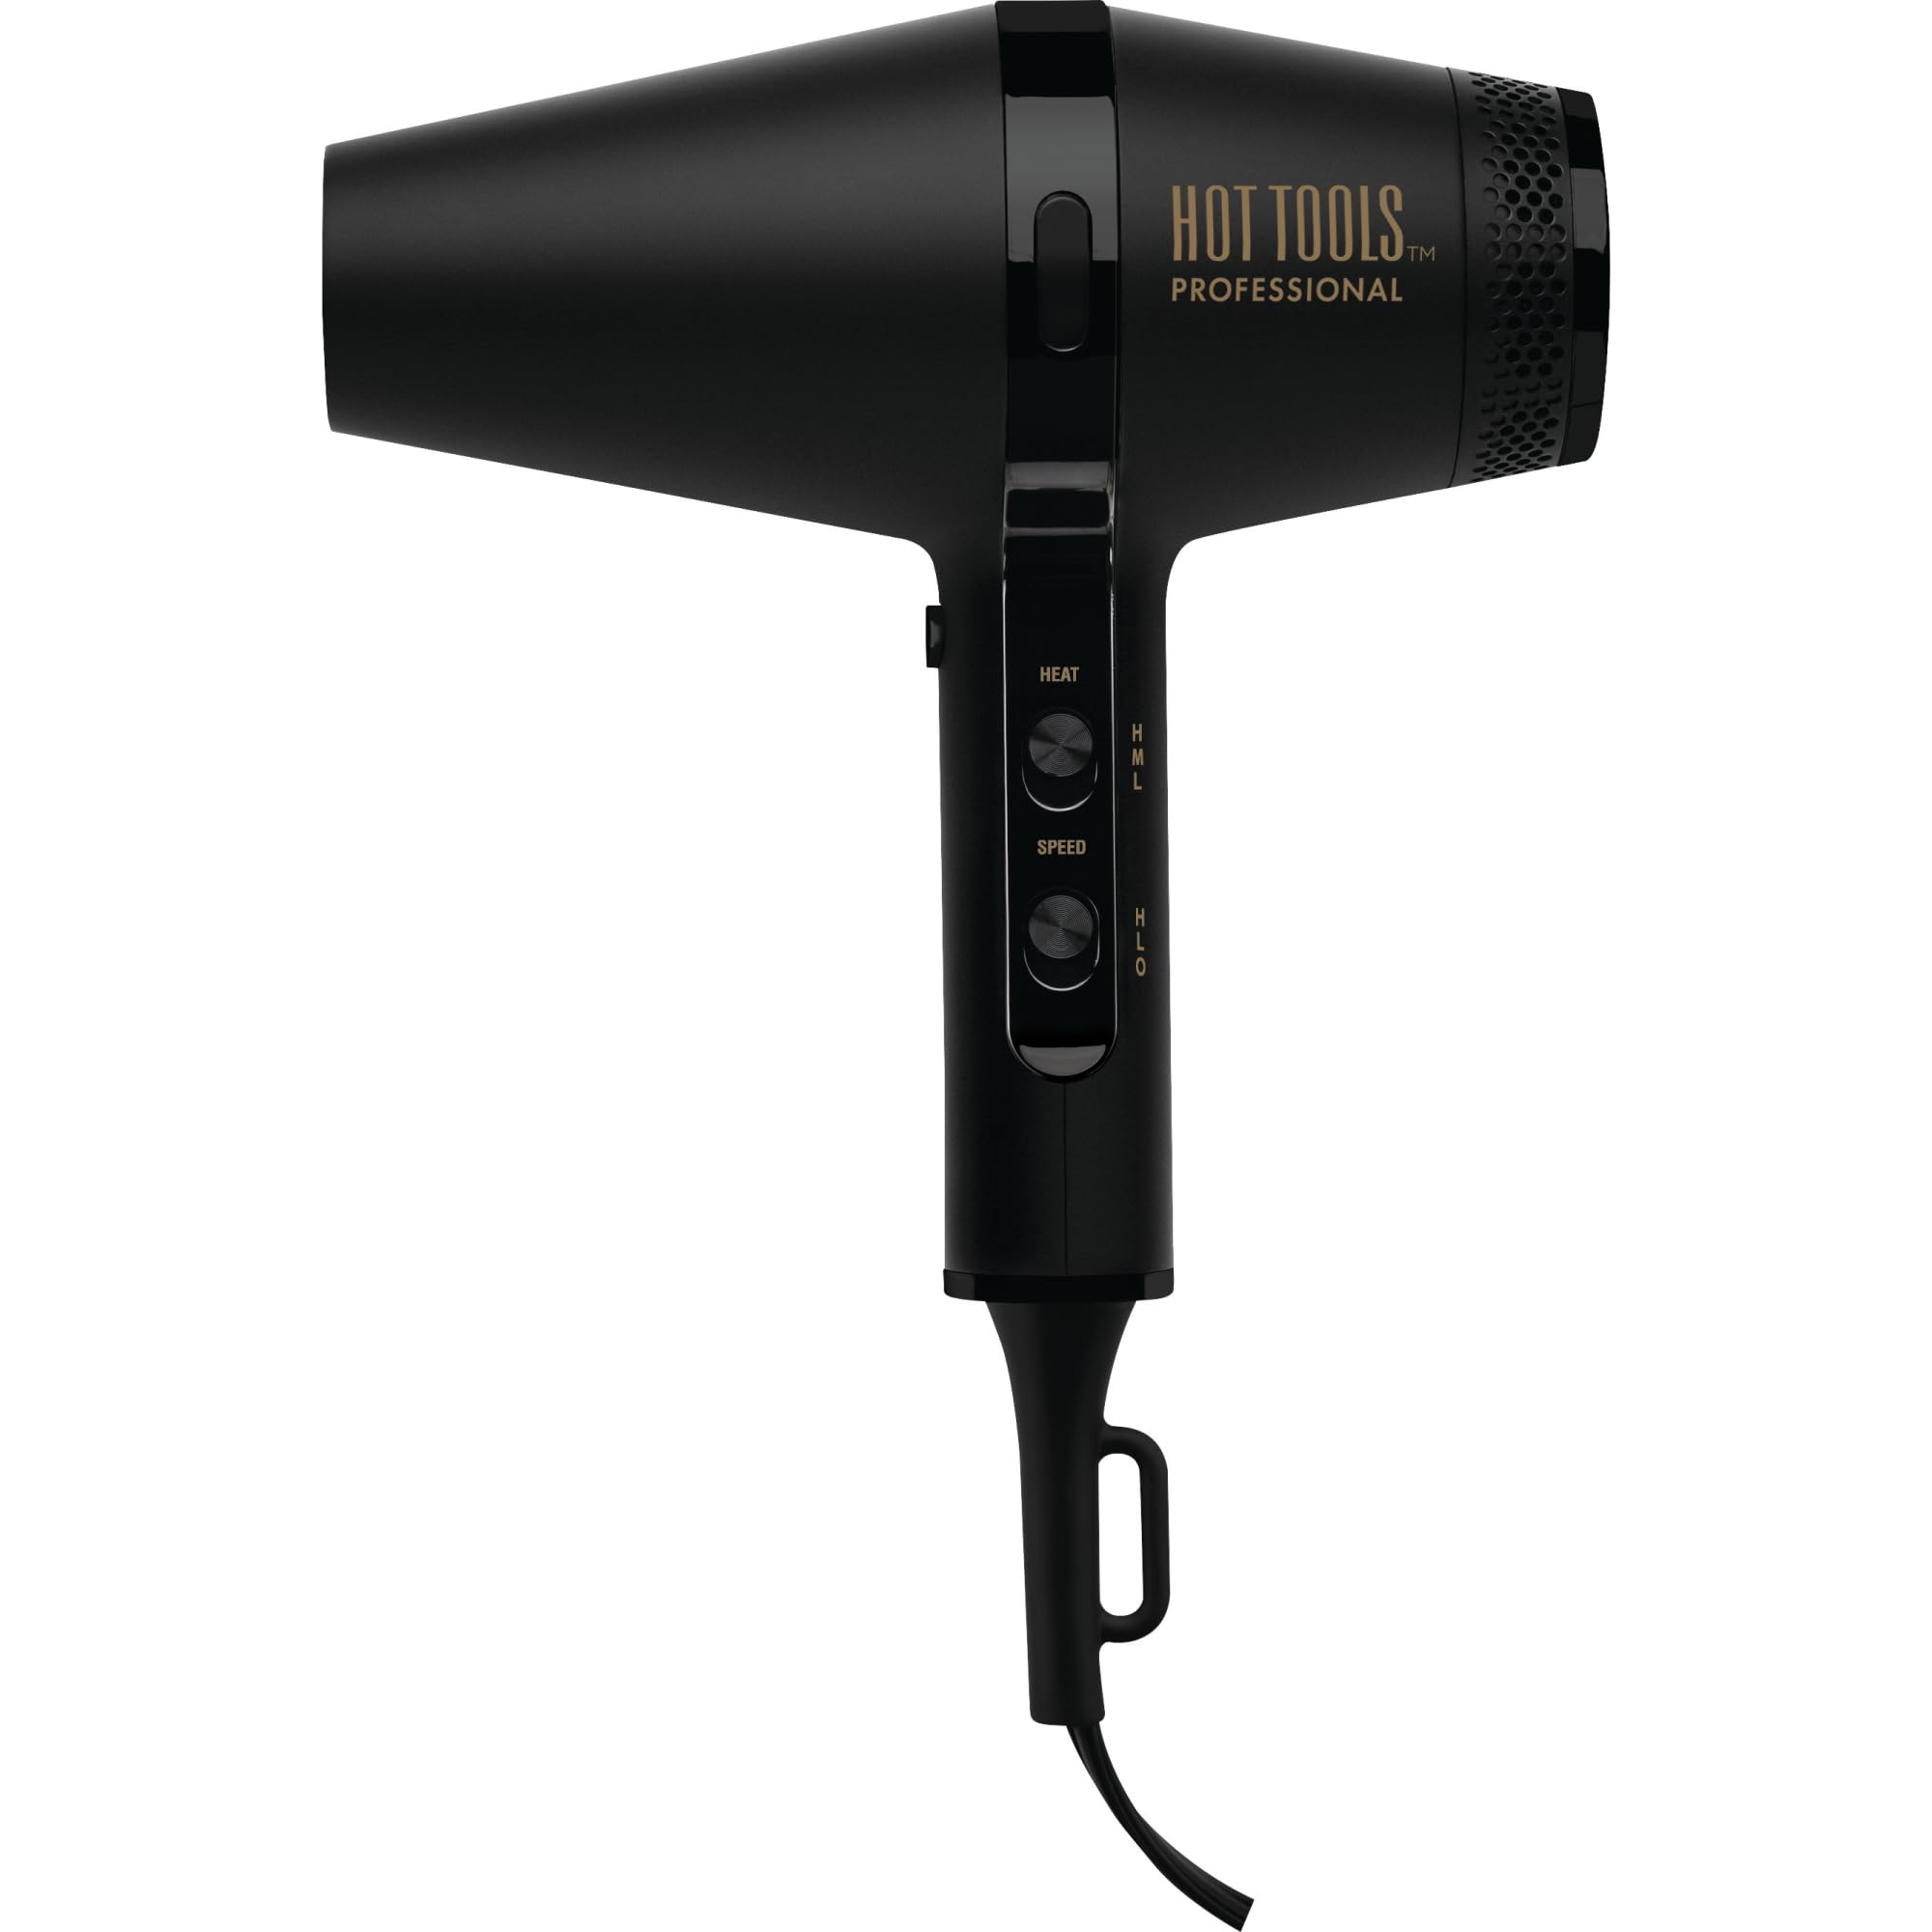 HOT TOOLS Pro Artist Black Gold Infrared Ionic™ Salon Dryer | Fast Drying, Styling and Smooth Results (Black)